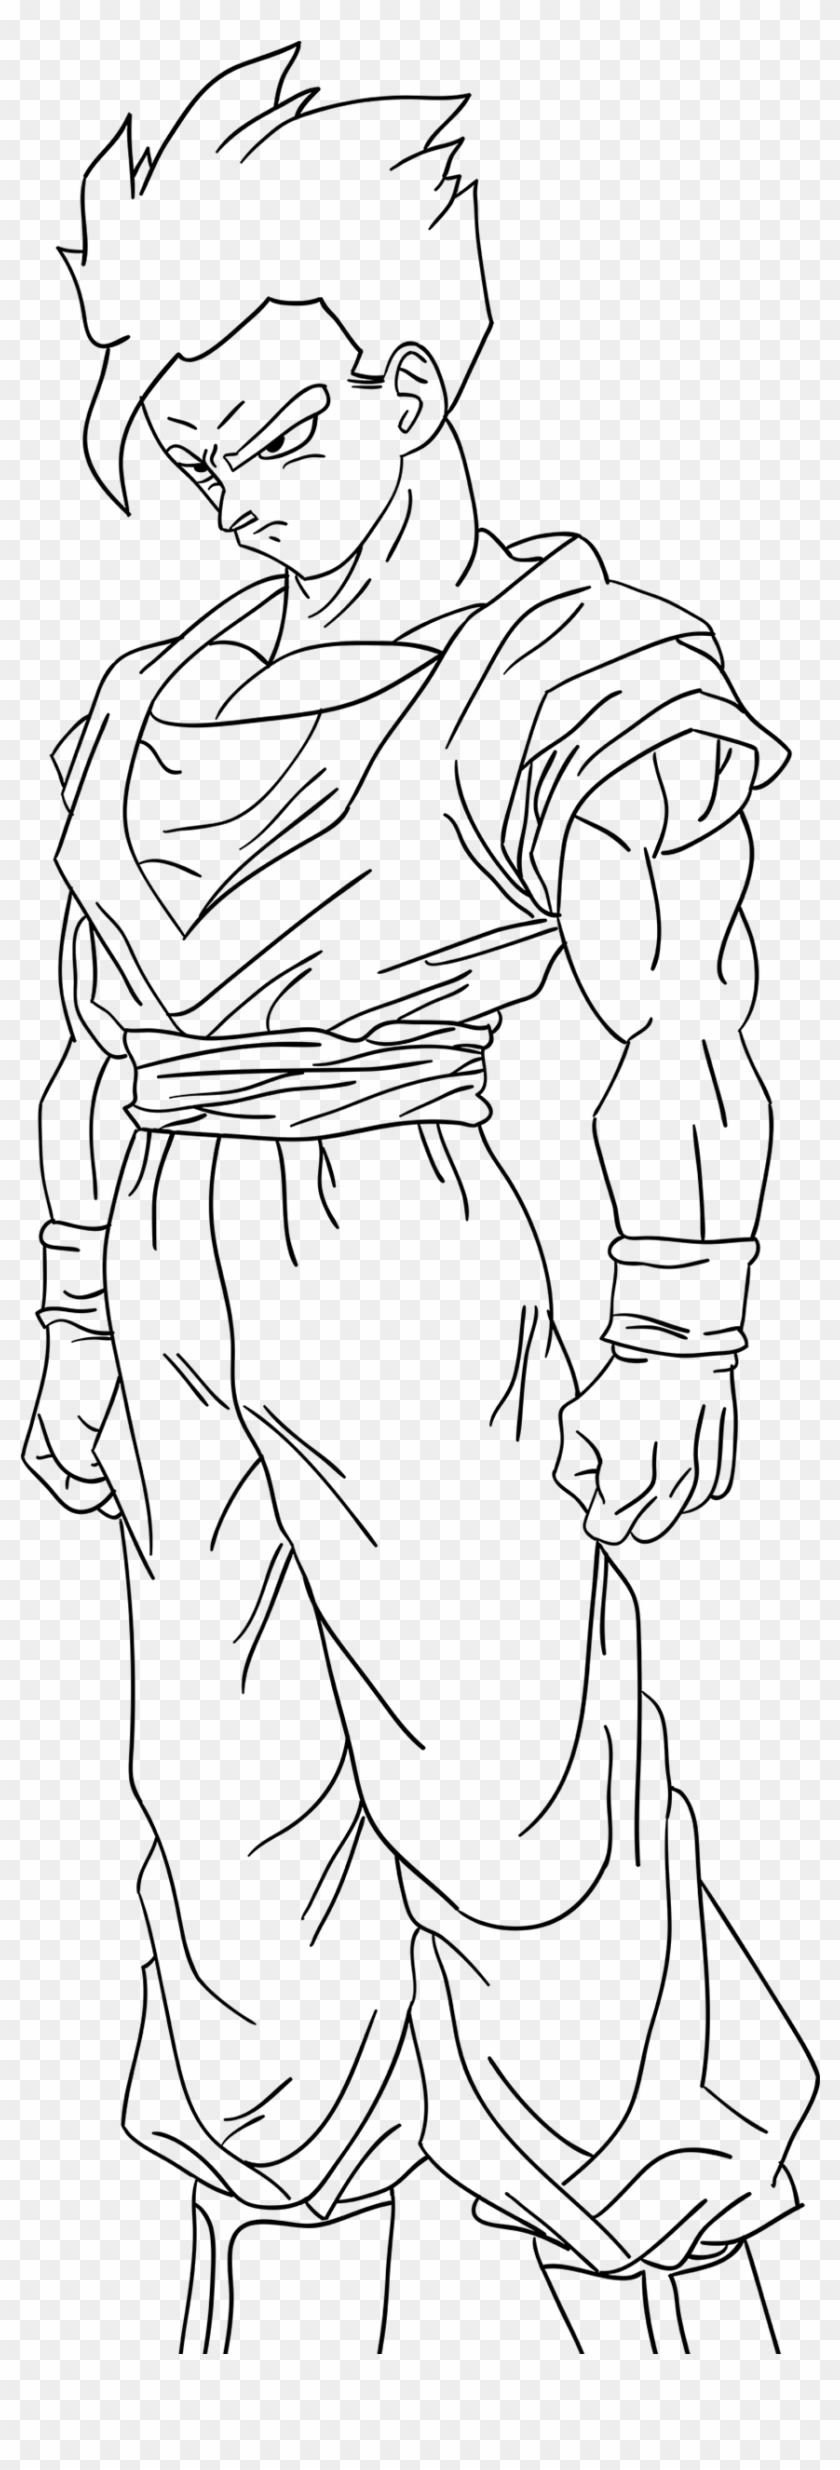 7 Pics Of Dbz Gohan Coloring Pages Dragon Ball Z Ultimate Gohan Drawing Hd Png Download 1000x2500 Pngfind